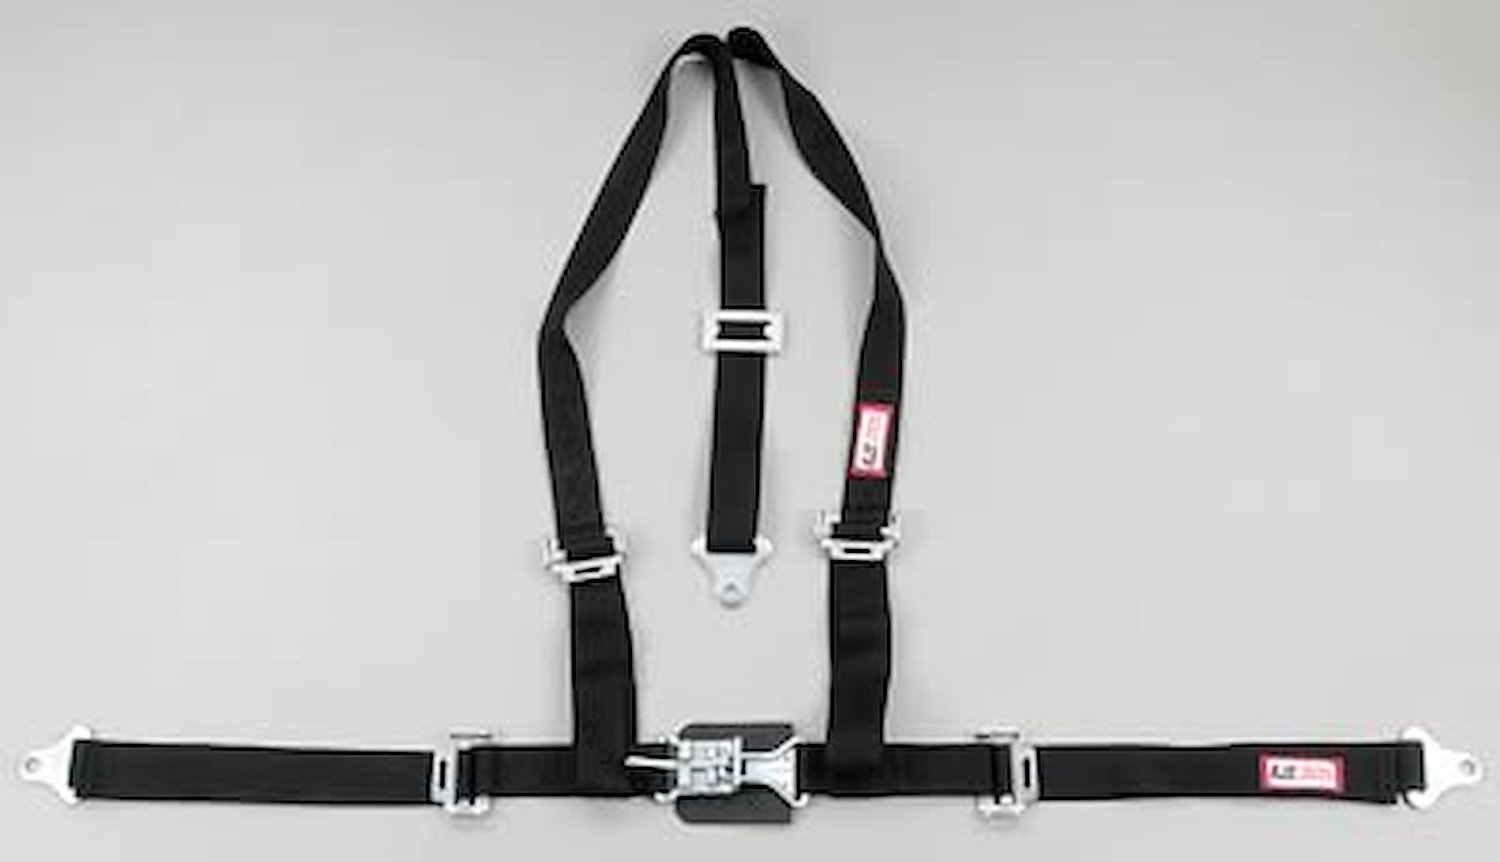 NON-SFI L&L HARNESS 3 PULL DOWN Lap Belt SEWN IN 2 Shoulder Harness V ROLL BAR Mount ALL SNAP ENDS PURPLE